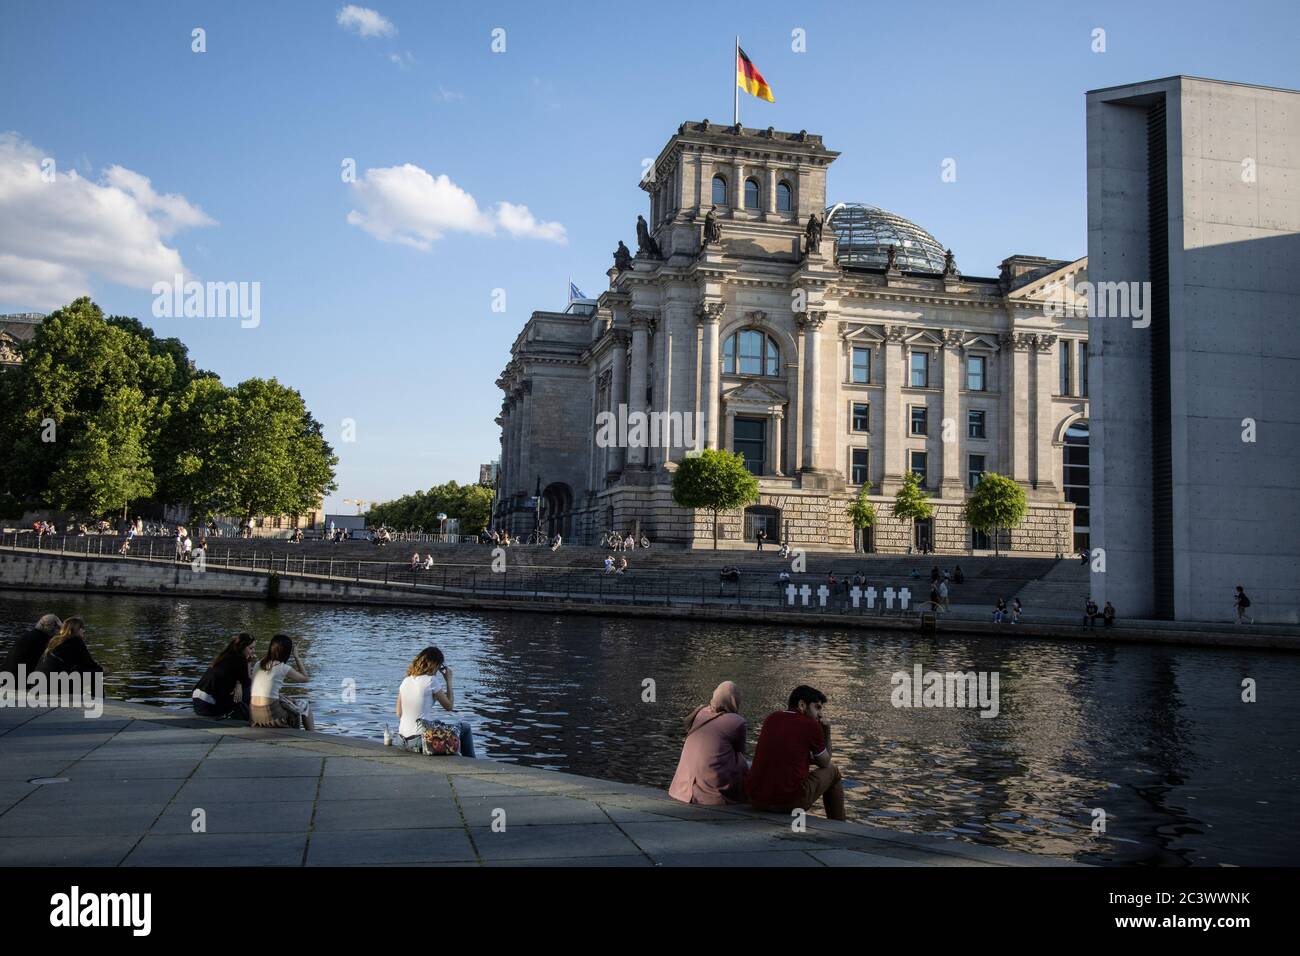 Marie-Elisabeth-Lüders-Haus building situated in the government area along the River Spree, Berlin, Germany, Europe Stock Photo